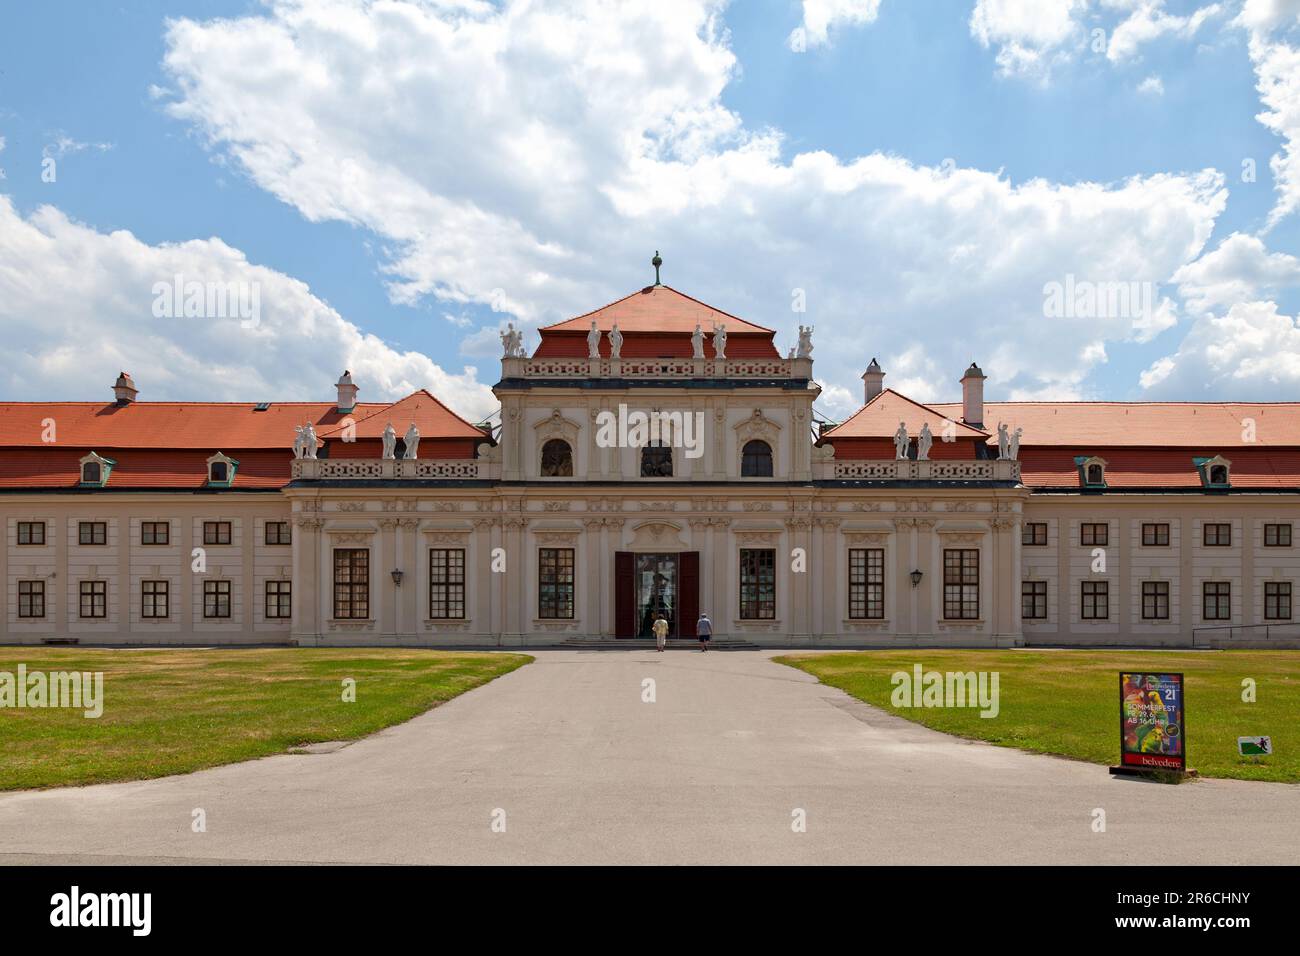 Vienna, Austria - June 17 2018: The Lower Belvedere is a Baroque palace built in the 18th-century. It is part of the Belvedere complex. Stock Photo